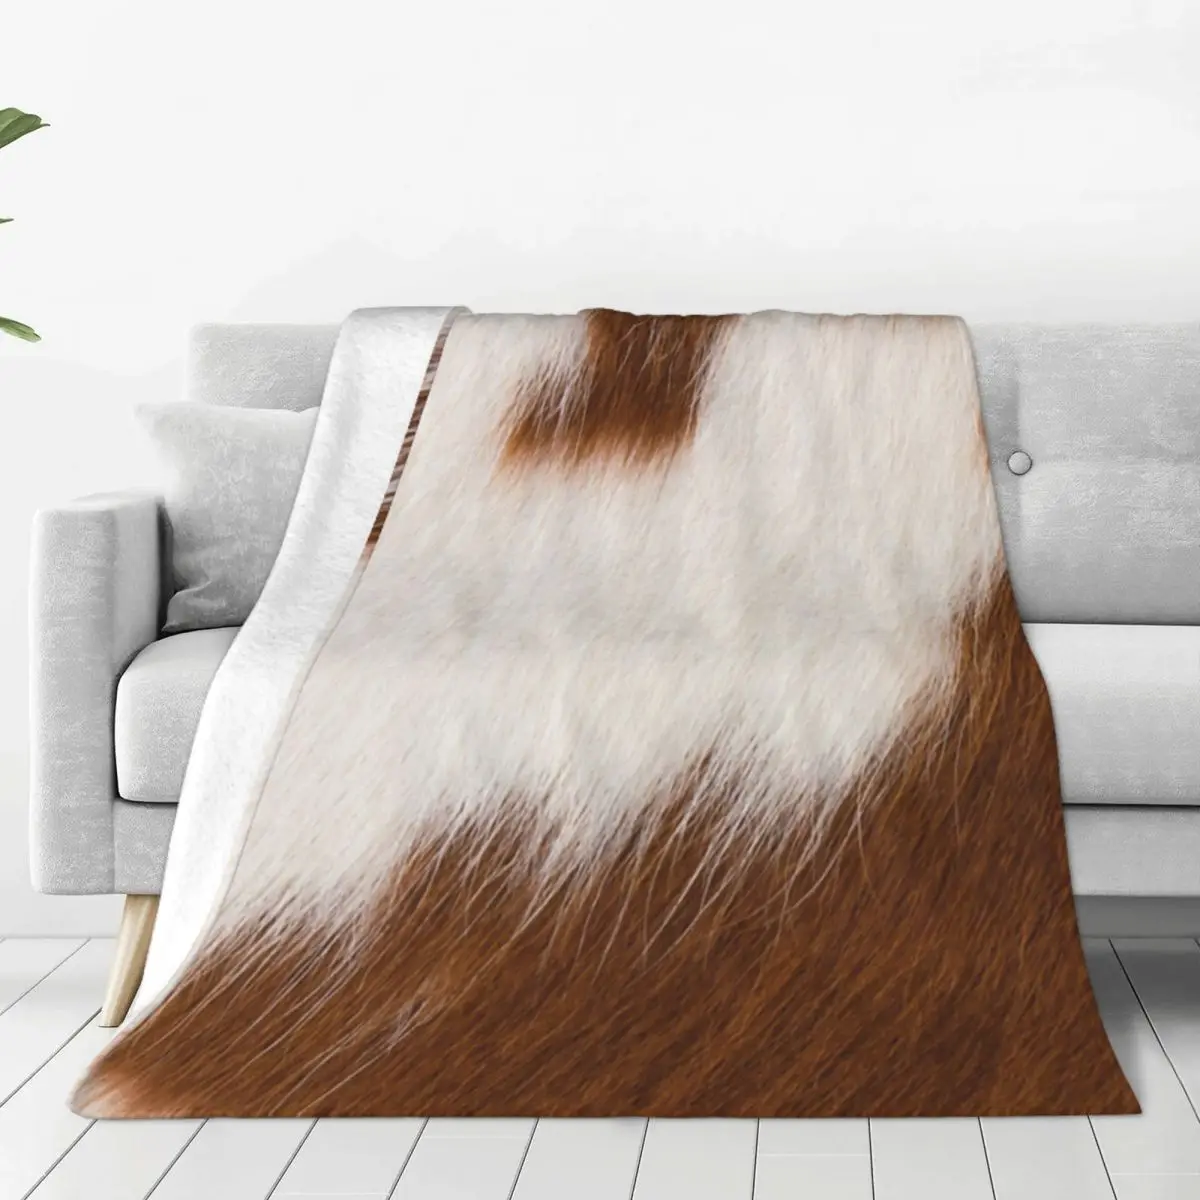 Brown And White Cowhide Image Velvet Throw Blankets Cow Print Gift for Kids Blankets for Bed Bedroom Ultra-Soft Quilt